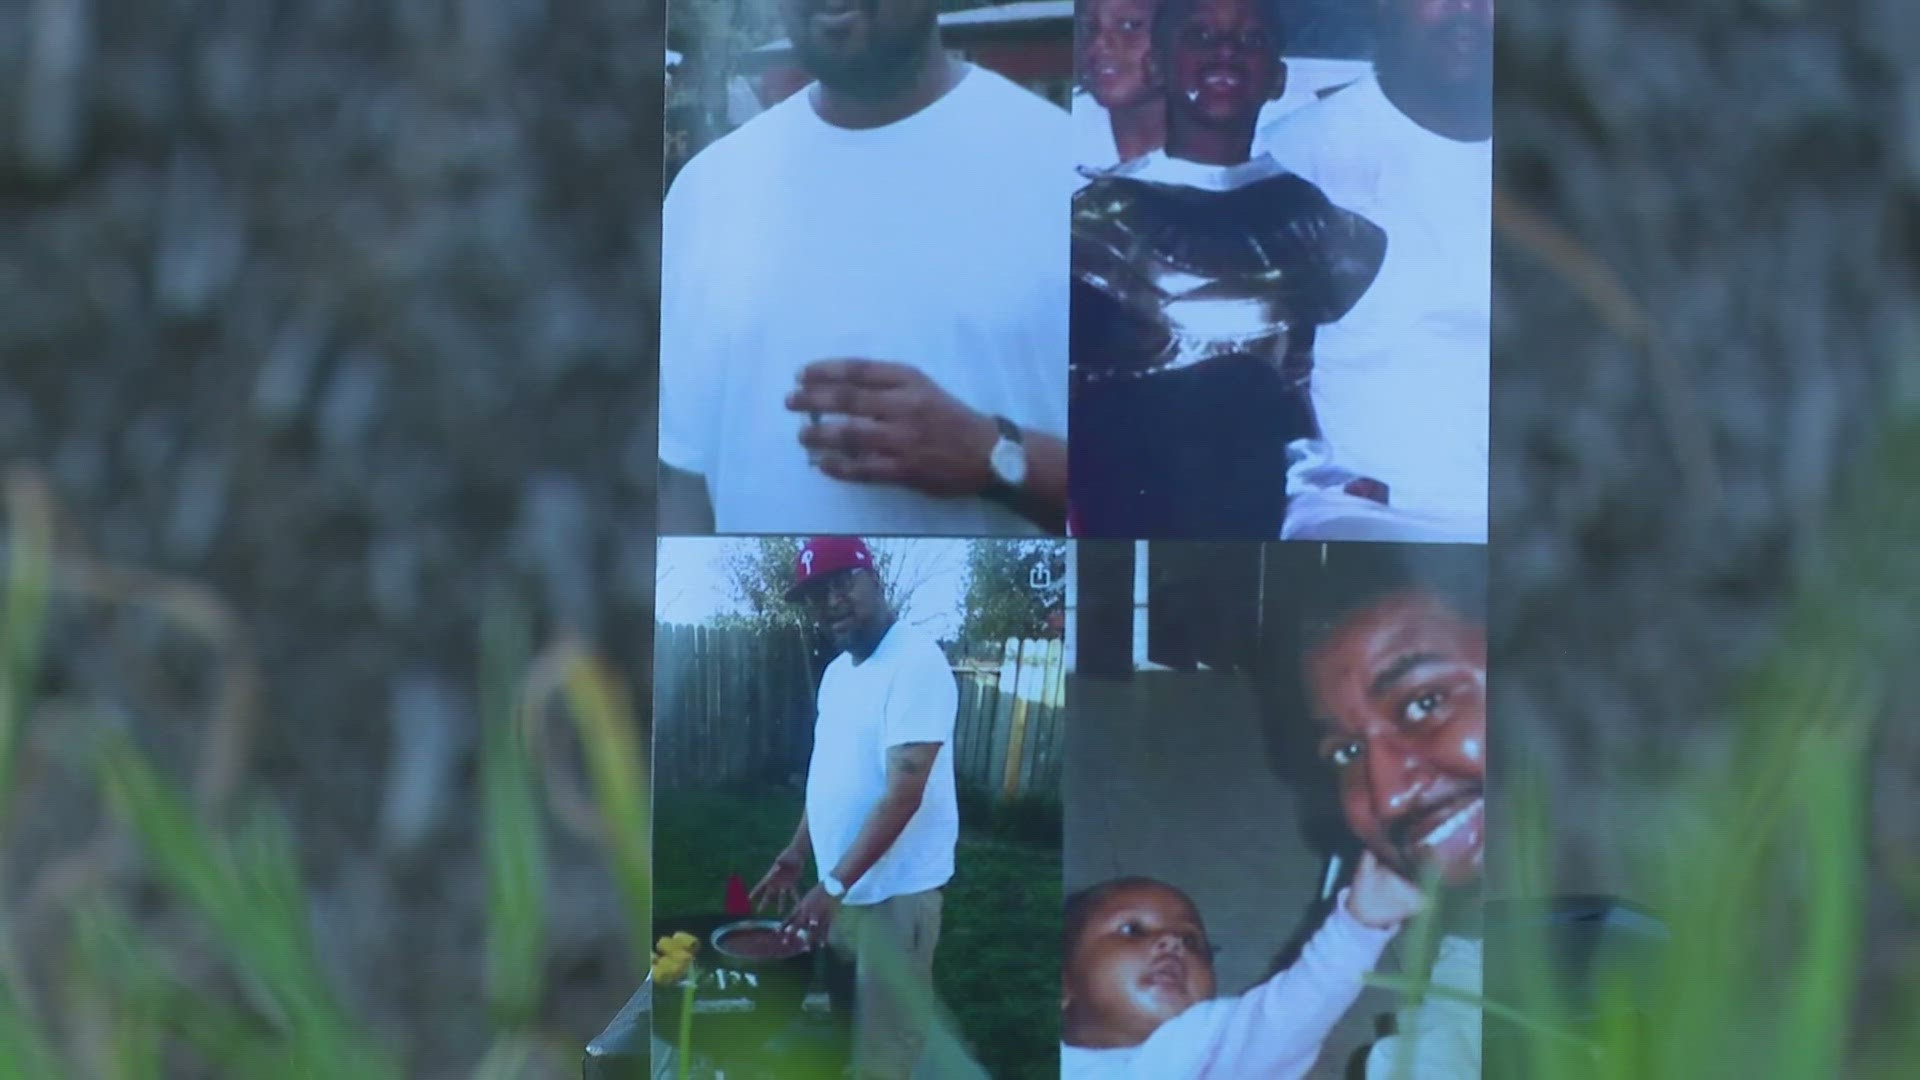 Sacramento to pay $4.3 million settlement to family of a man who died after being restrained by police